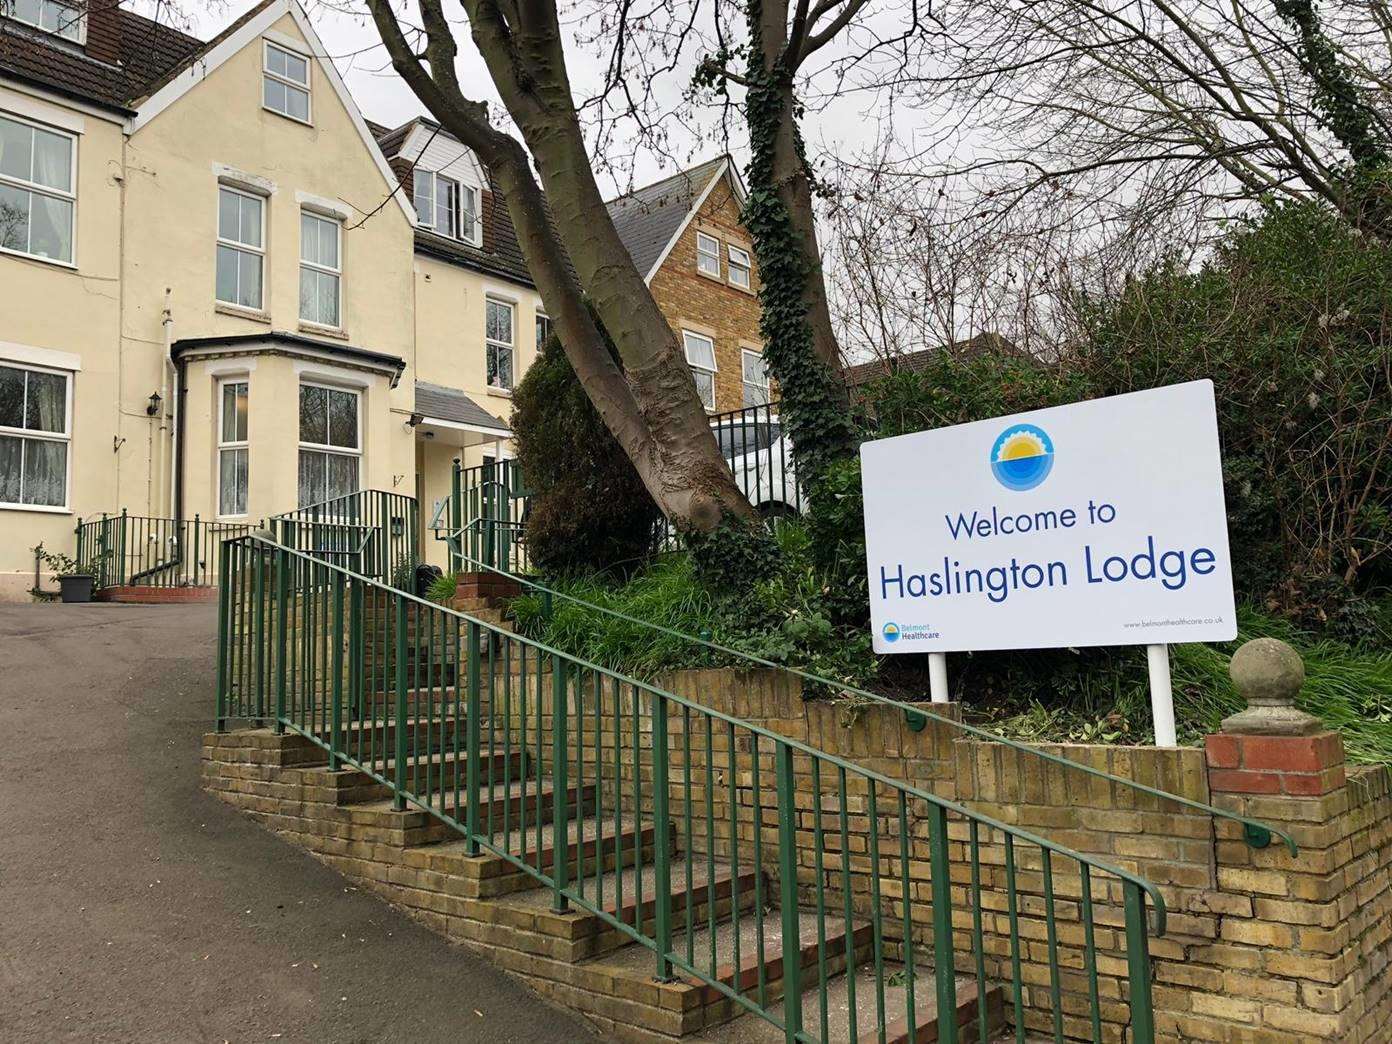 Care home in Greenhithe has now been renamed Haslington Lodge (6597995)